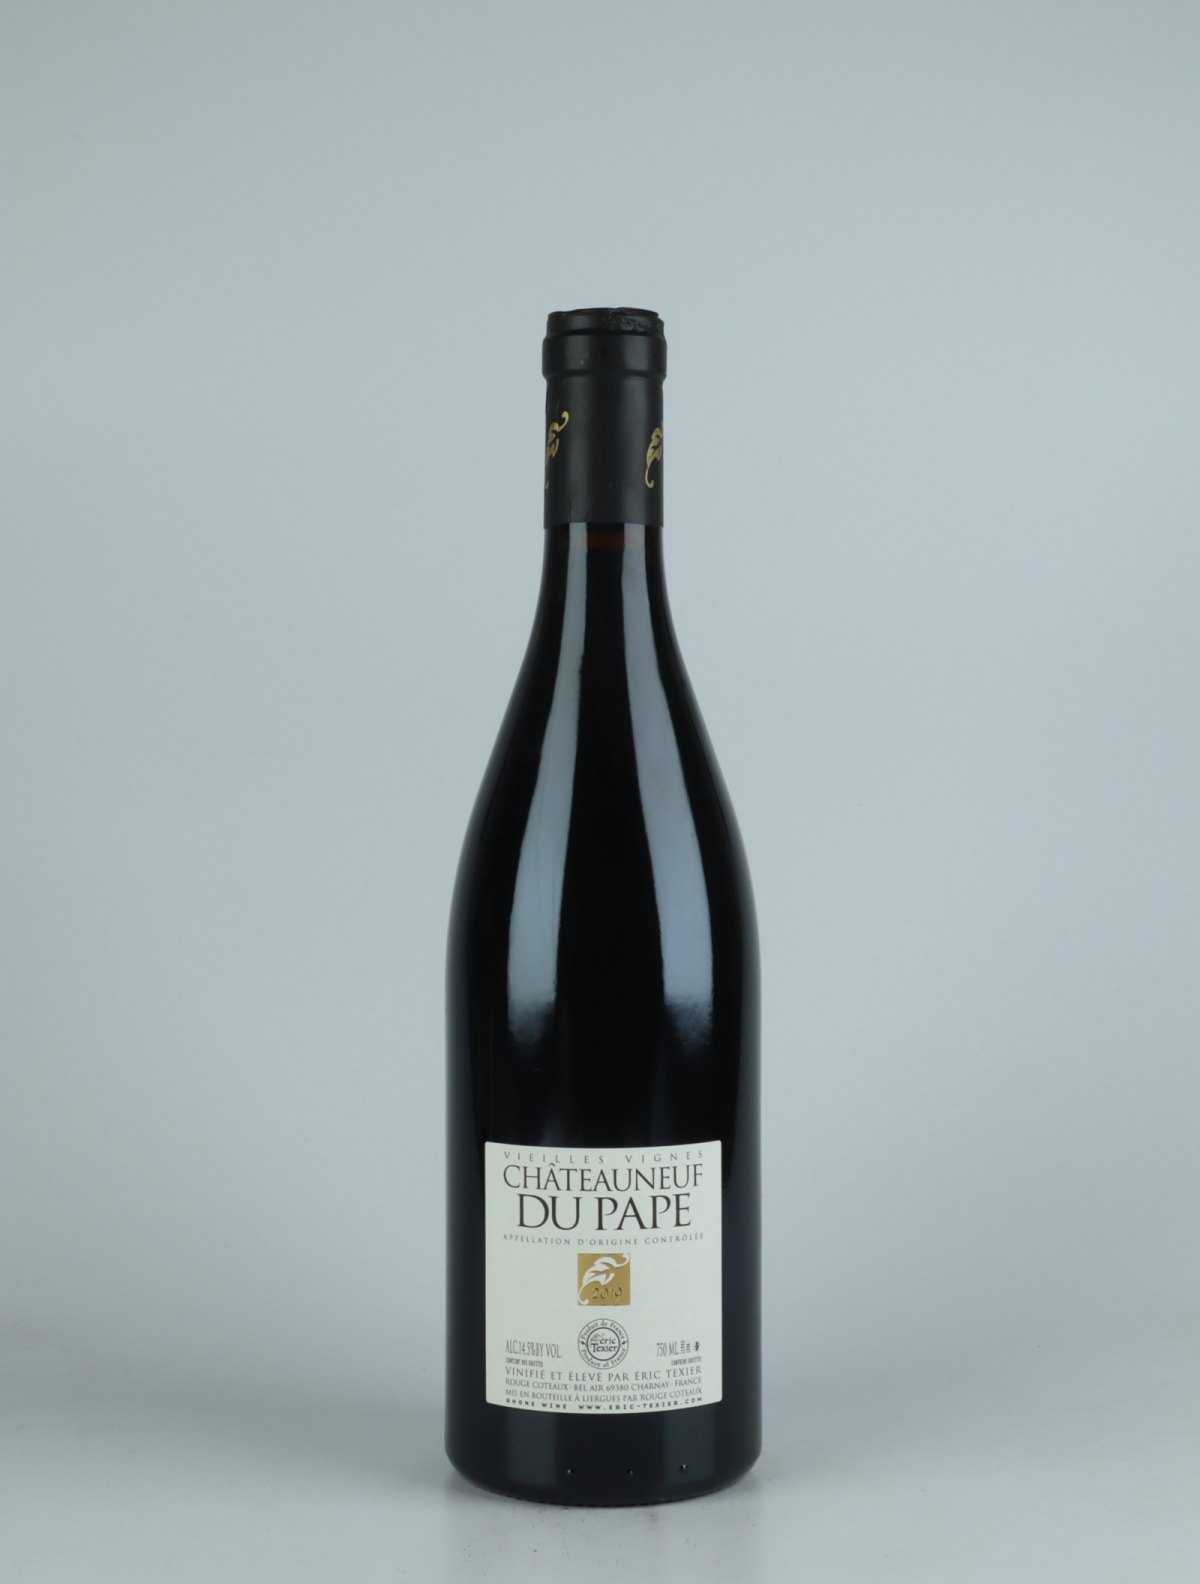 A bottle  Châteauneuf-du-pape V.V. Red wine from Eric Texier, Rhône in France